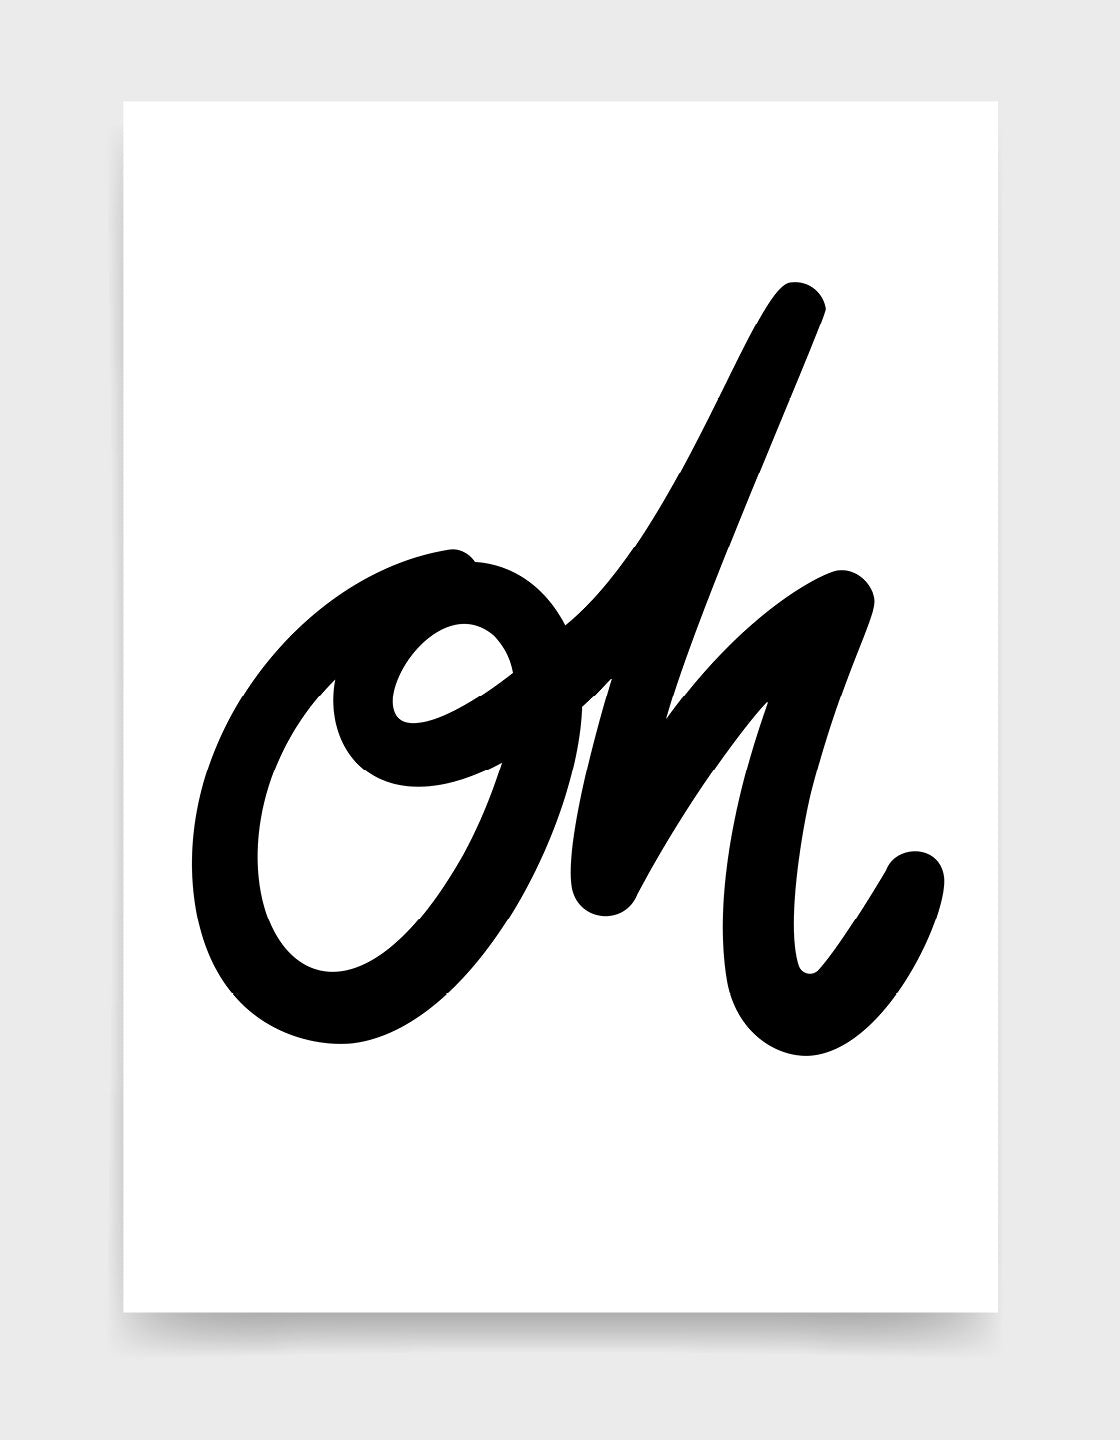 Monochrome typography print with the word oh in black cursive text on a white background